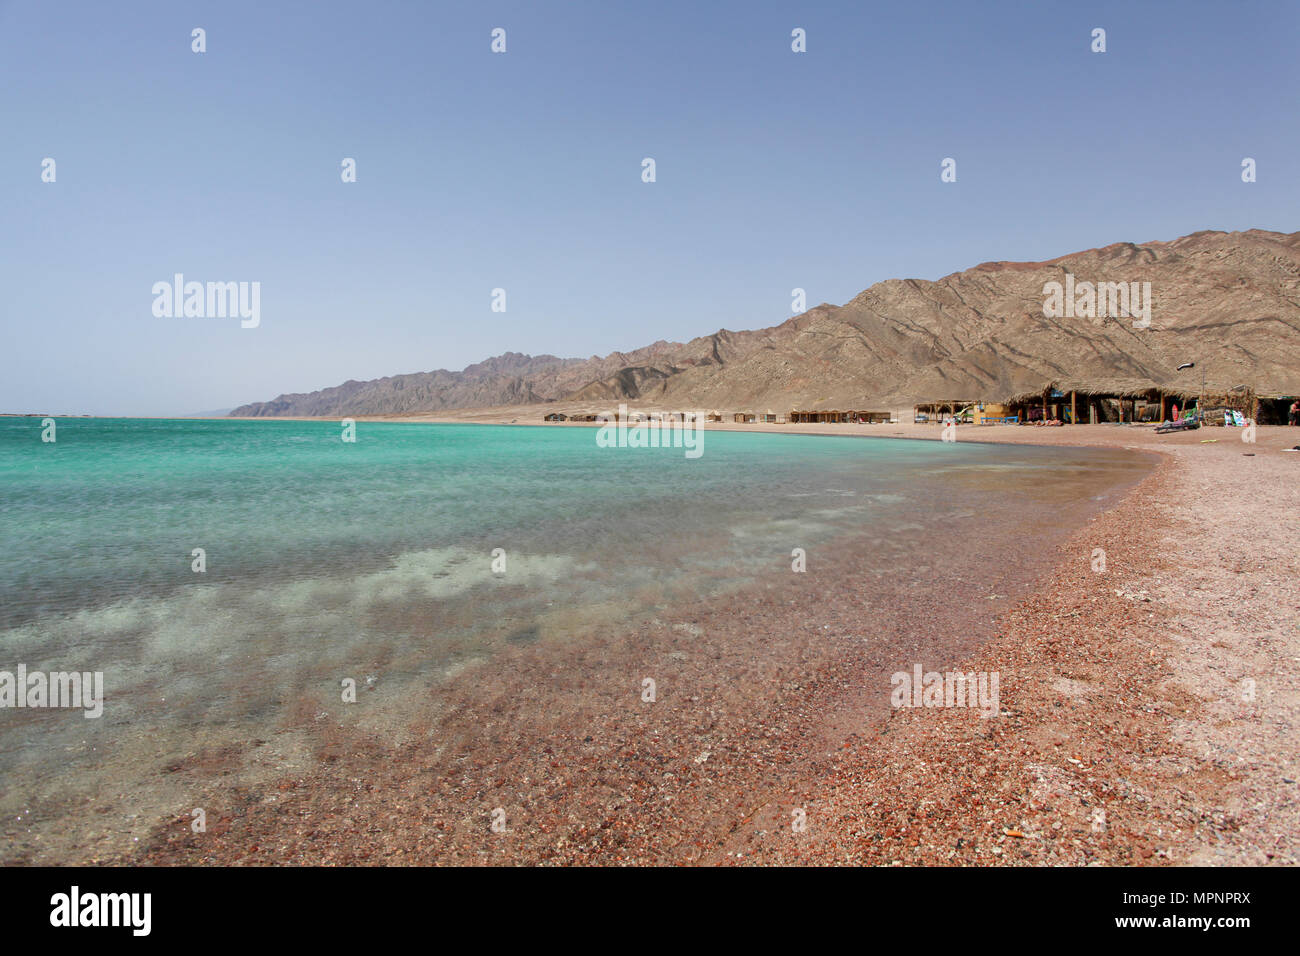 Deserted beaches at the Blue Lagoon (Dahab), Sinai, Egypt Tourist's shanty huts in the background Stock Photo